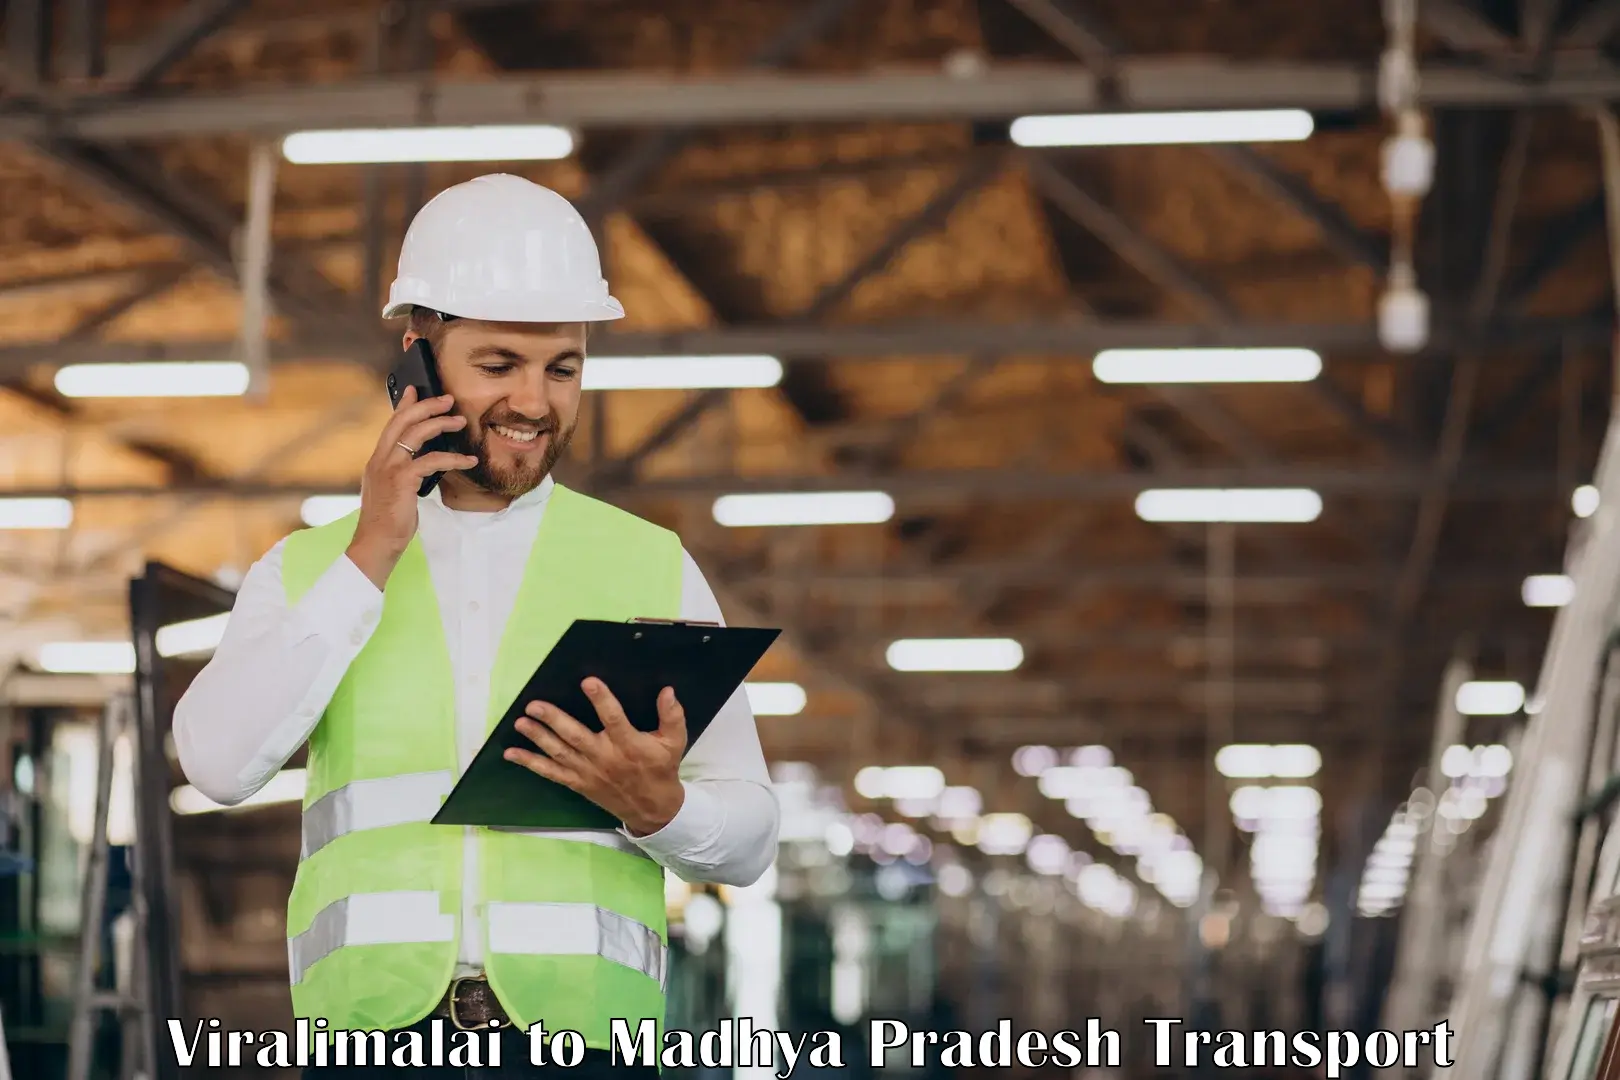 Commercial transport service Viralimalai to Petlawad